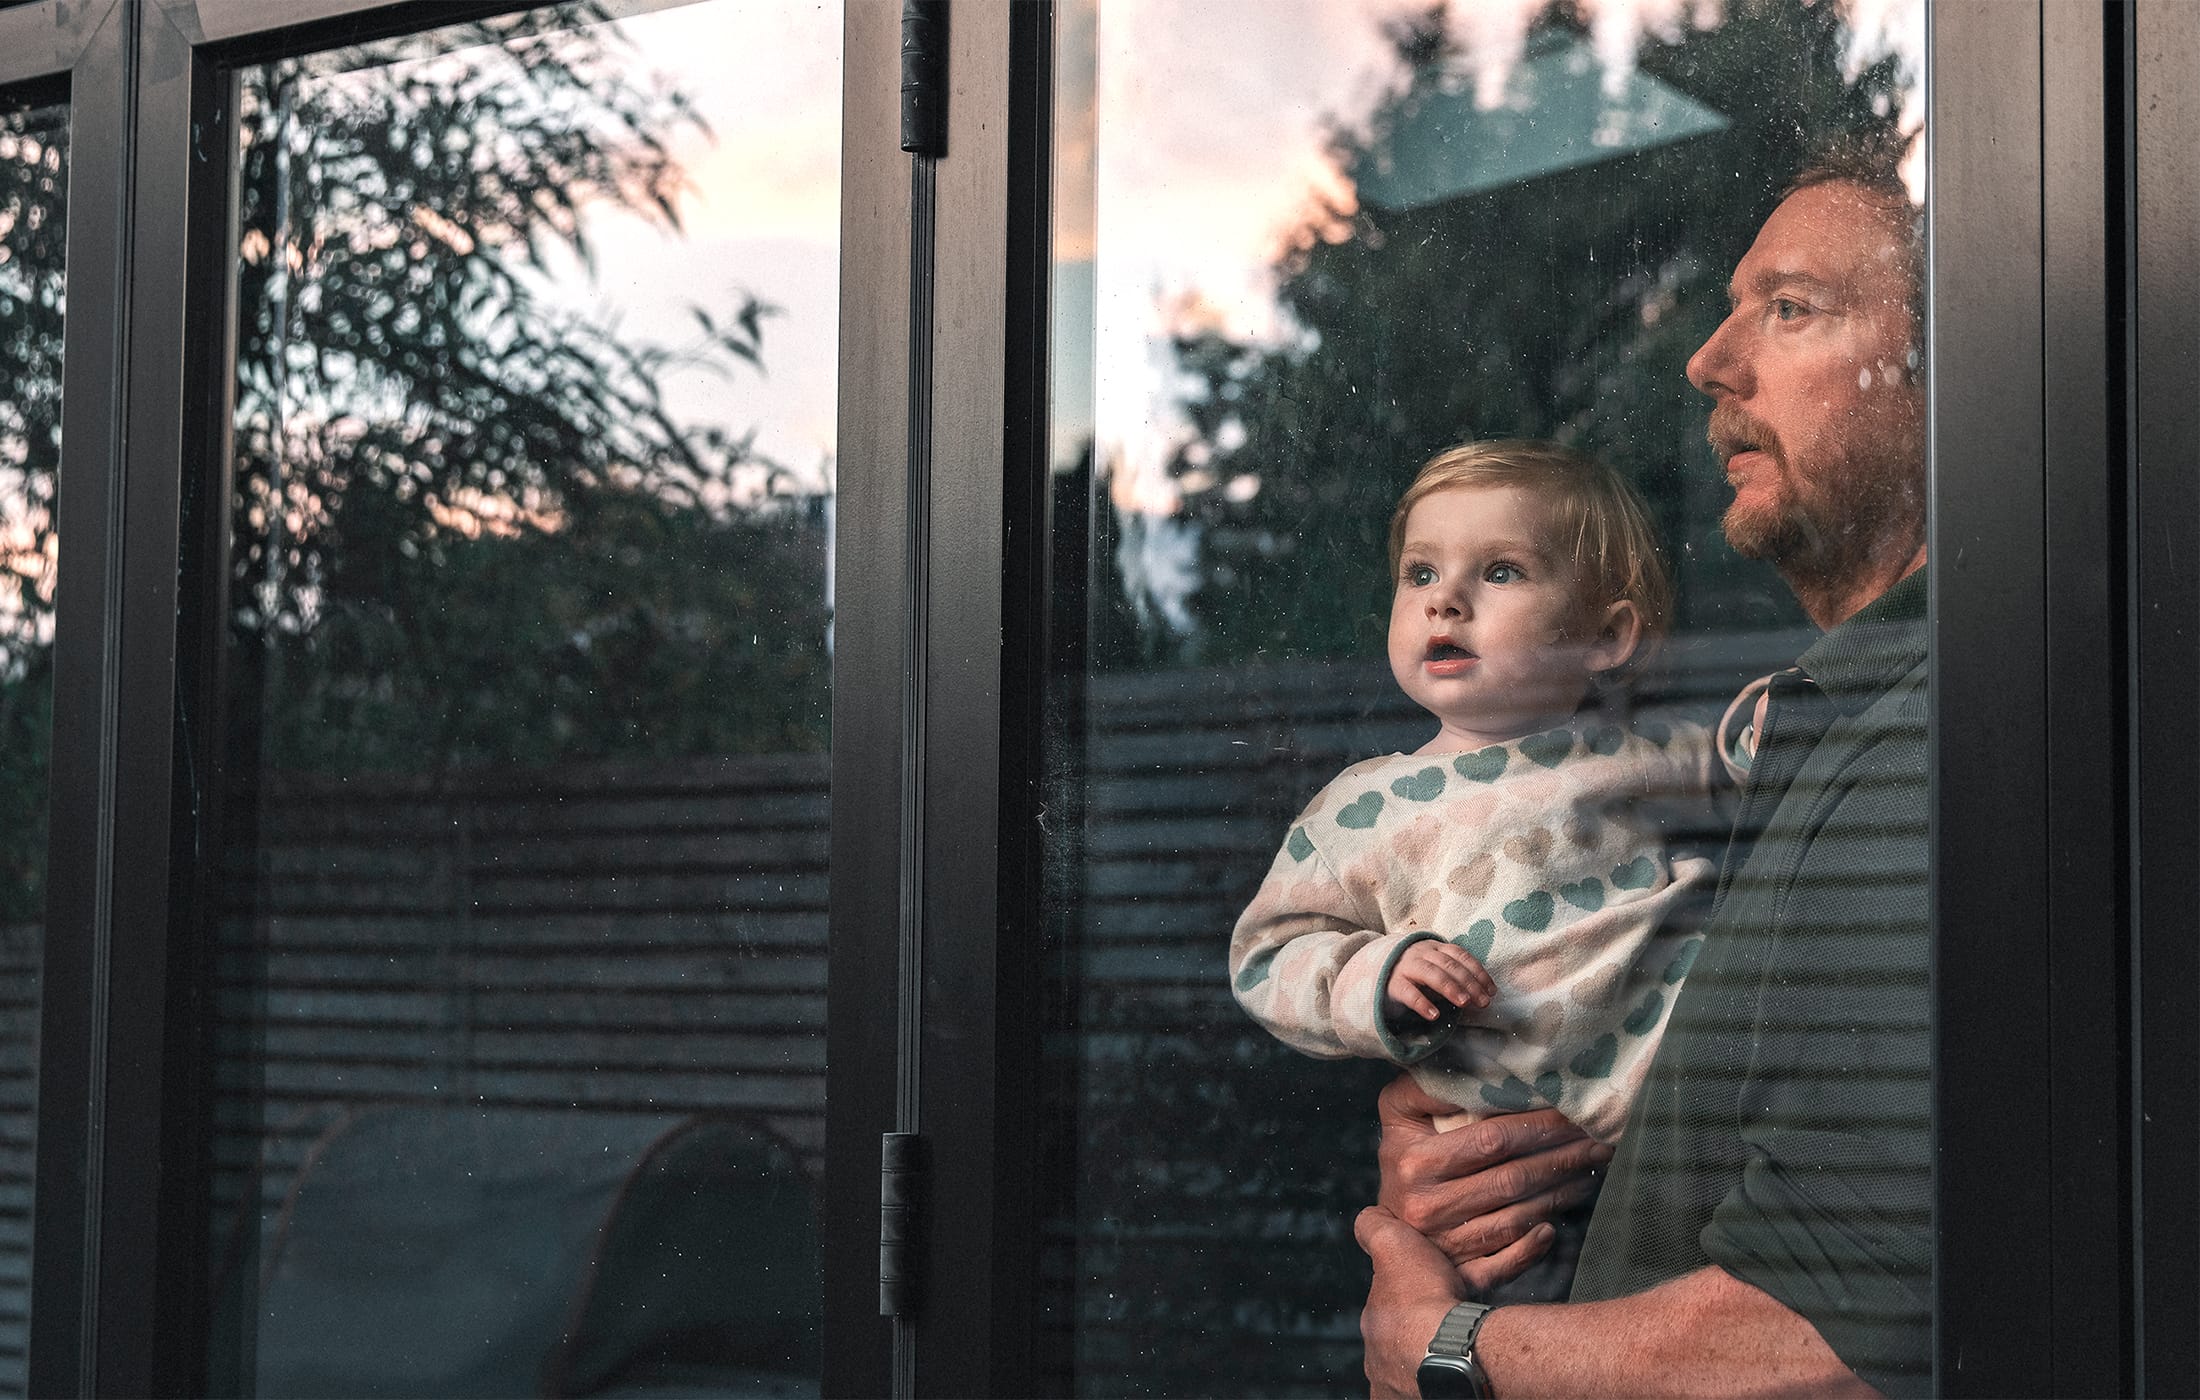 A man holding a child and looking out a window